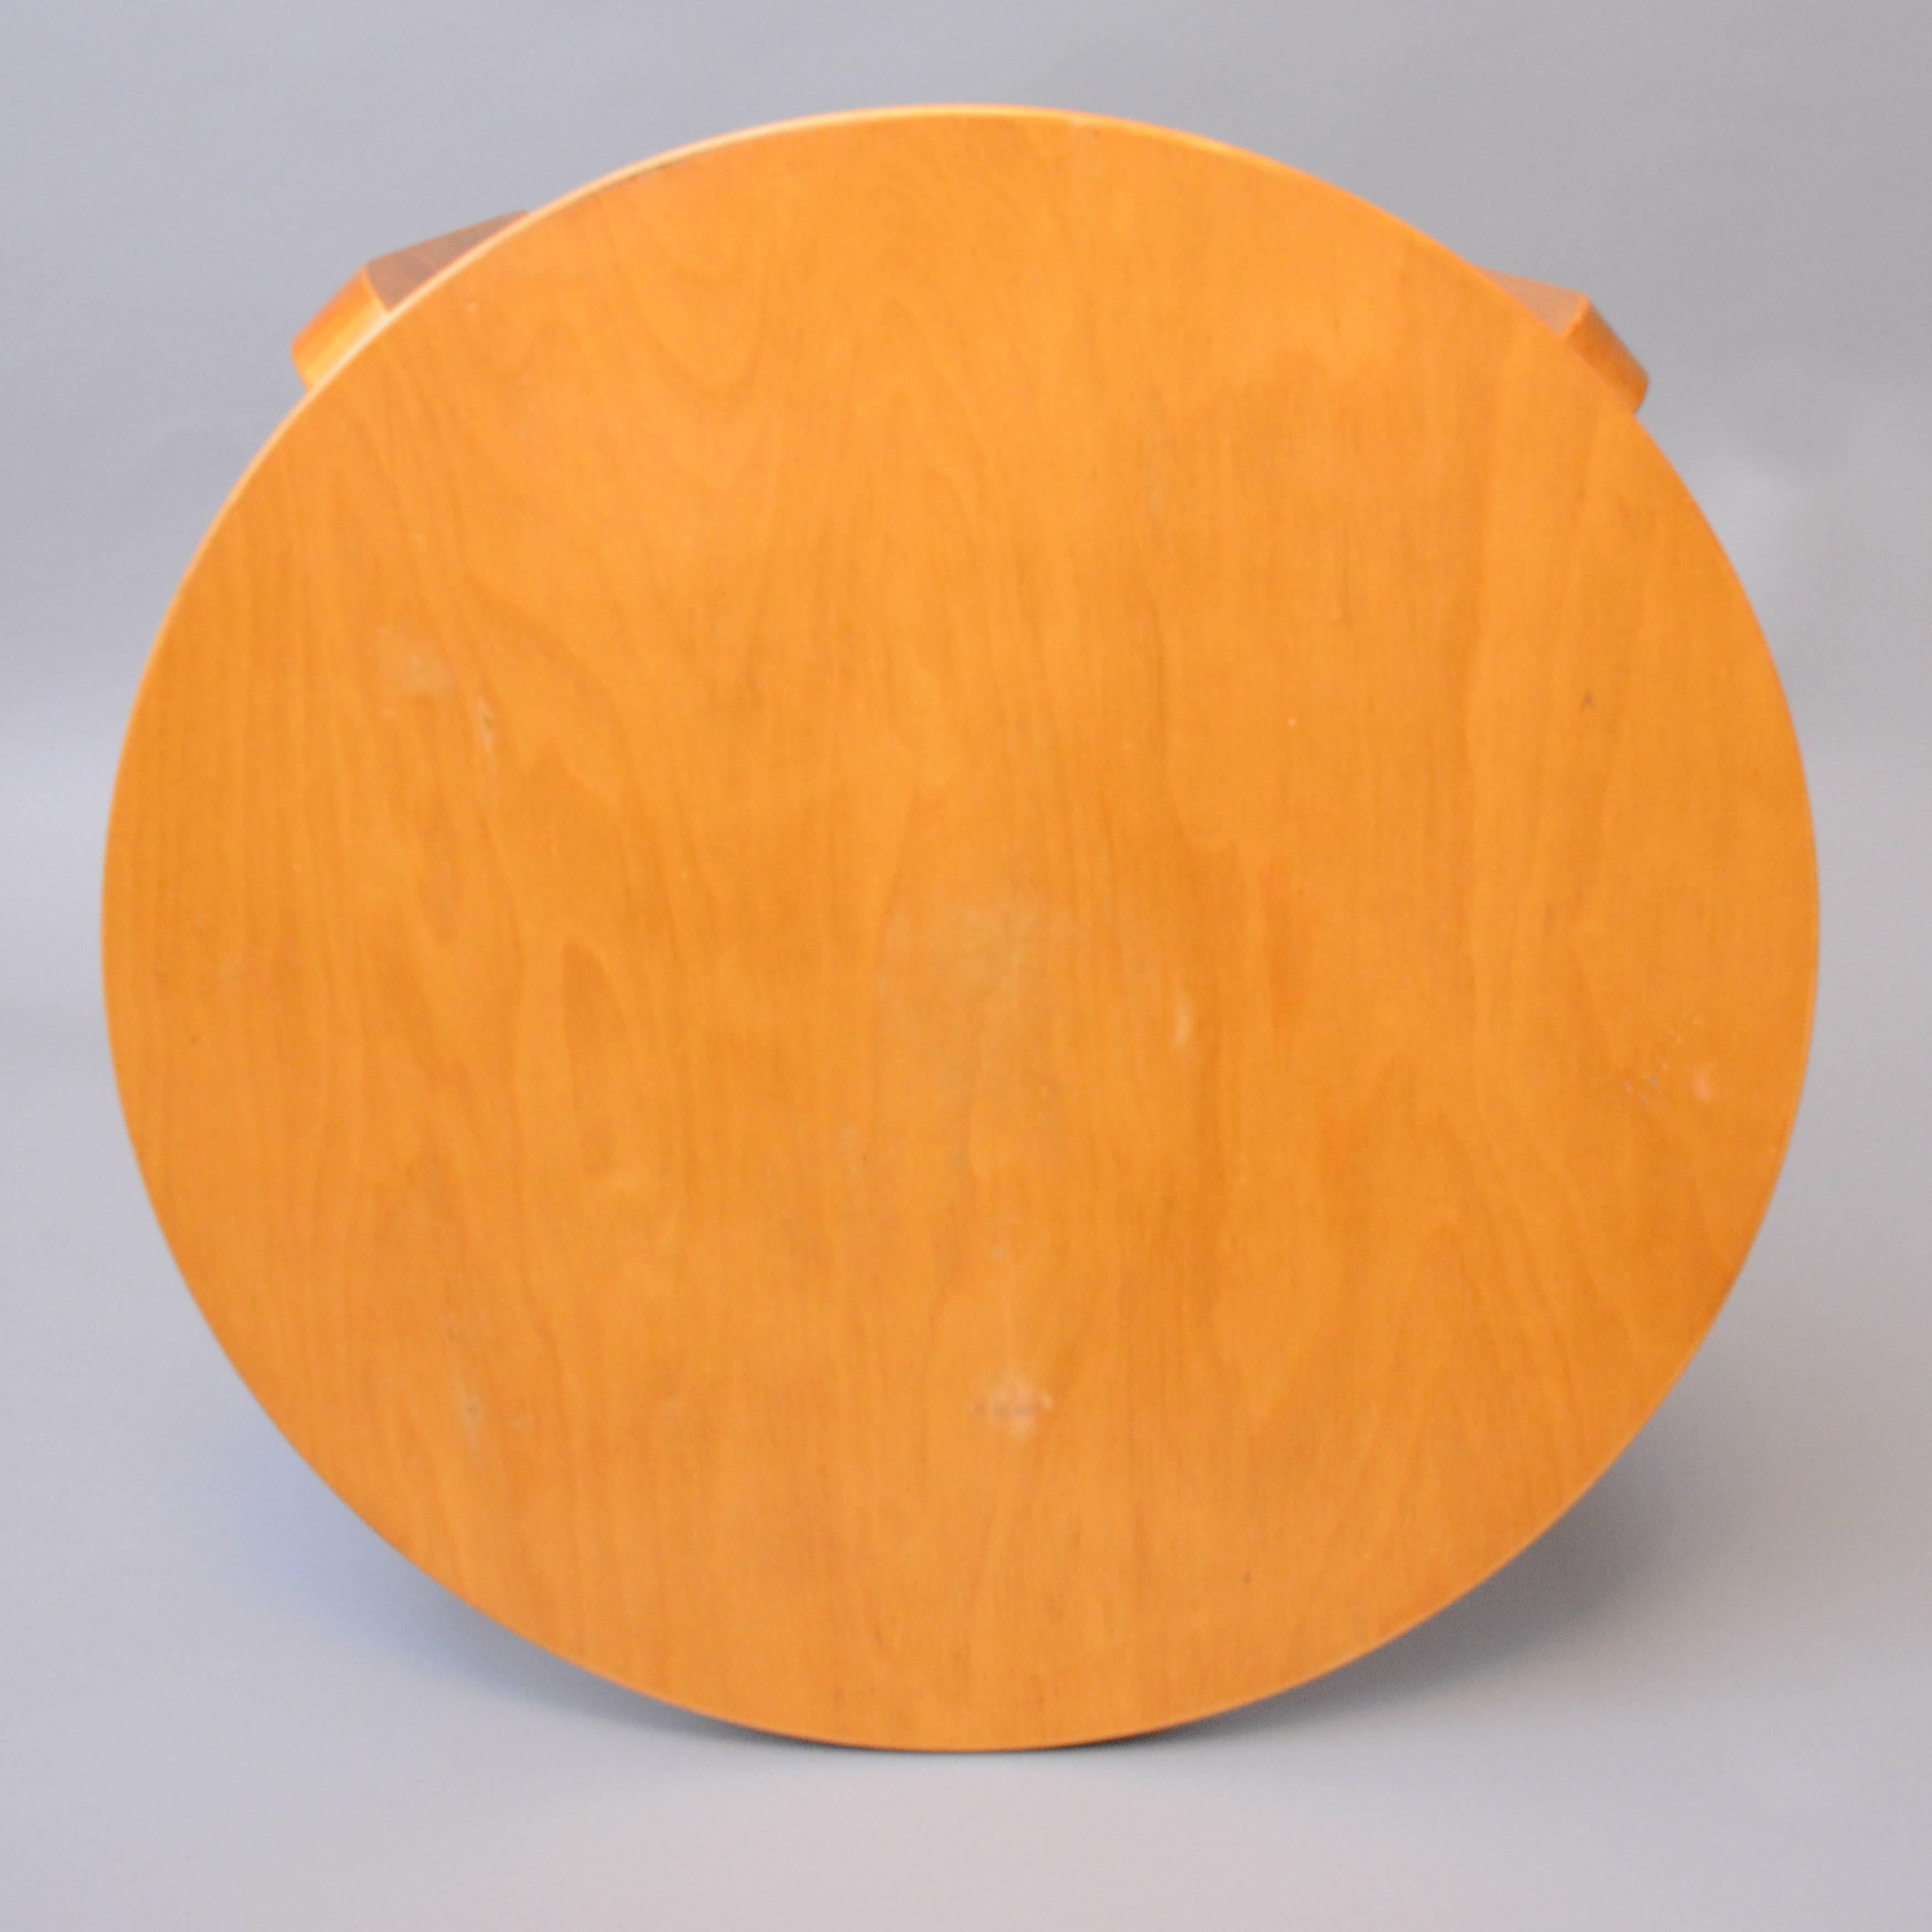 Finnish Round Table A70 by Alvar Aalto for Artek, Finland, 1930s-1940s For Sale